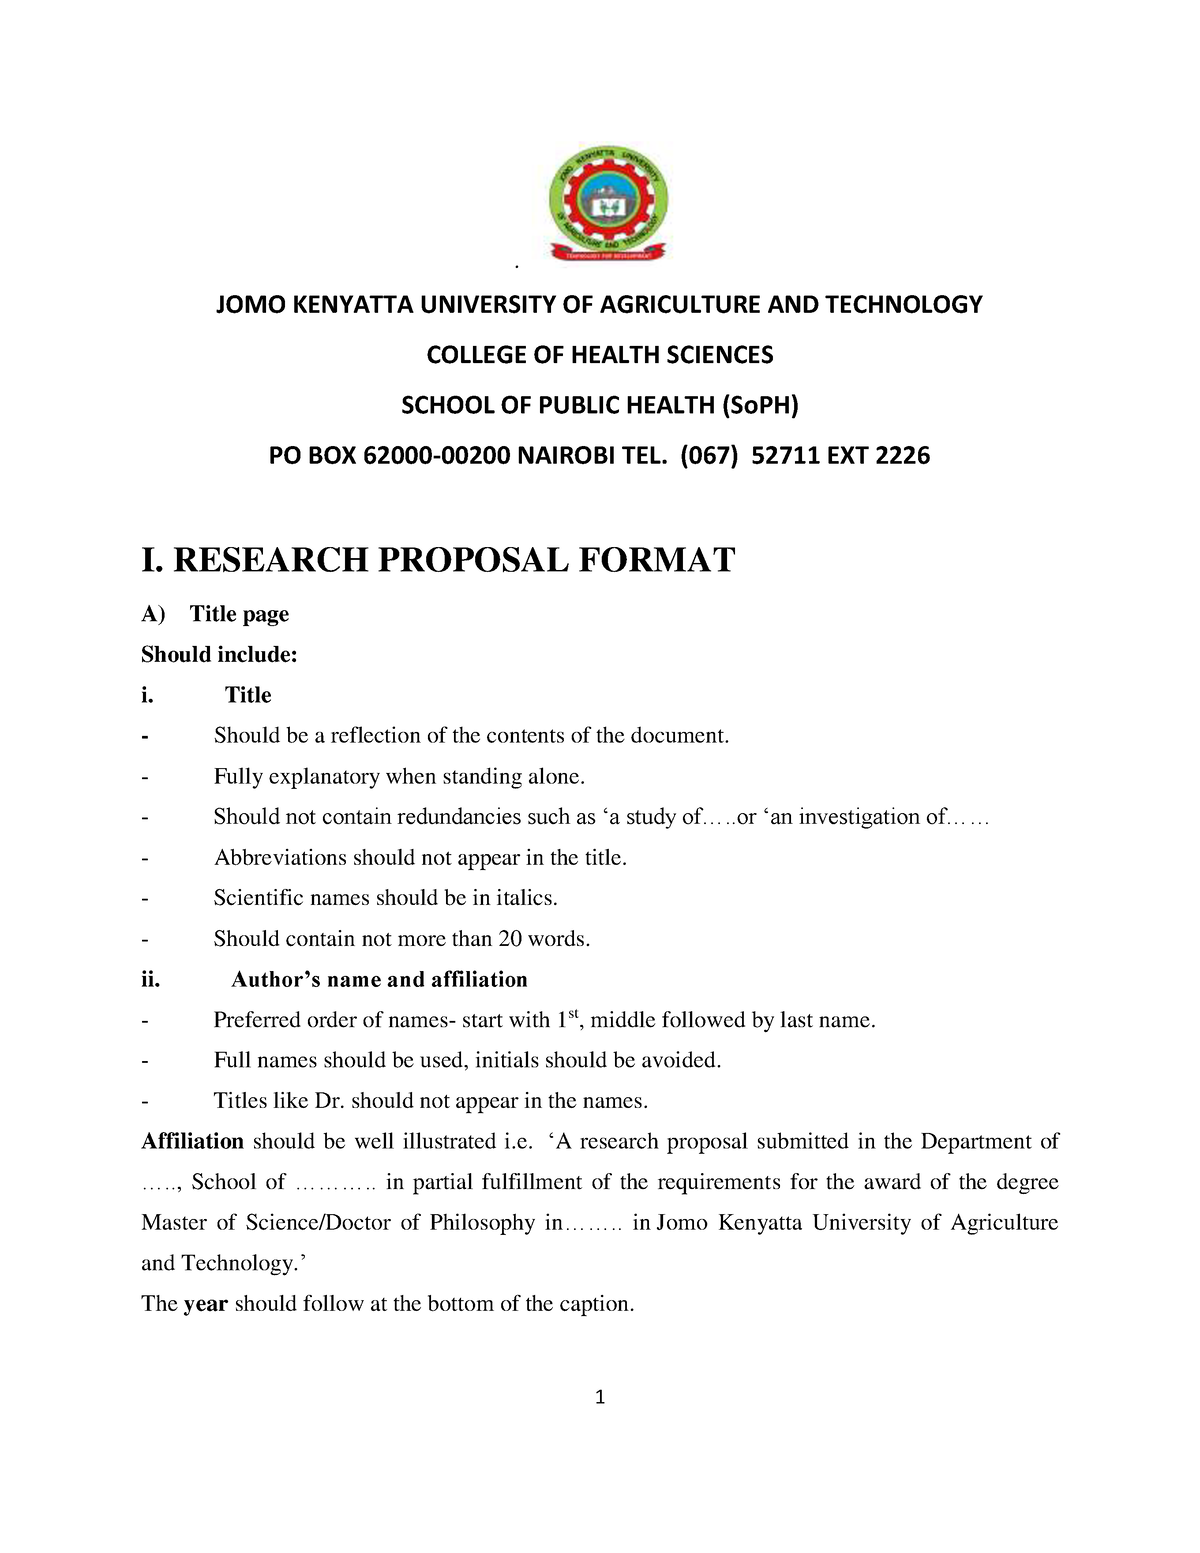 research proposal on agriculture topics